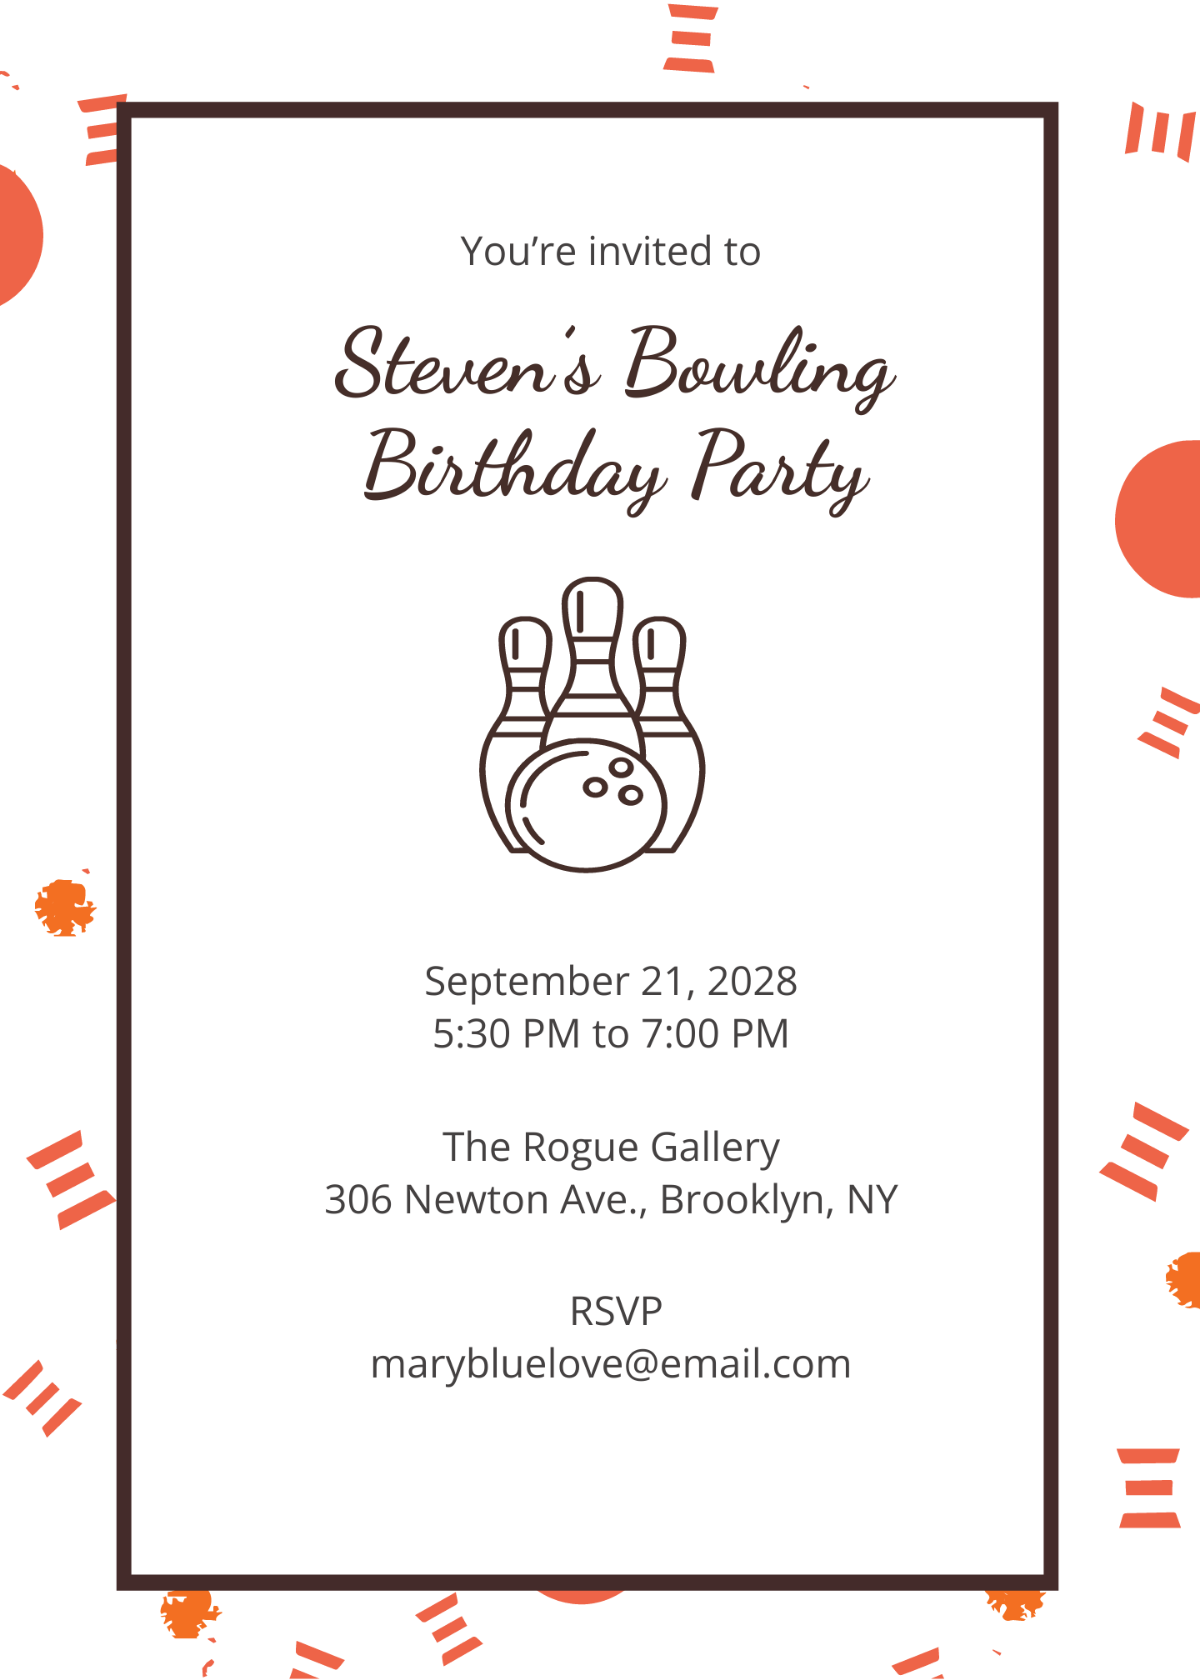 Bowling Party Invitation Template